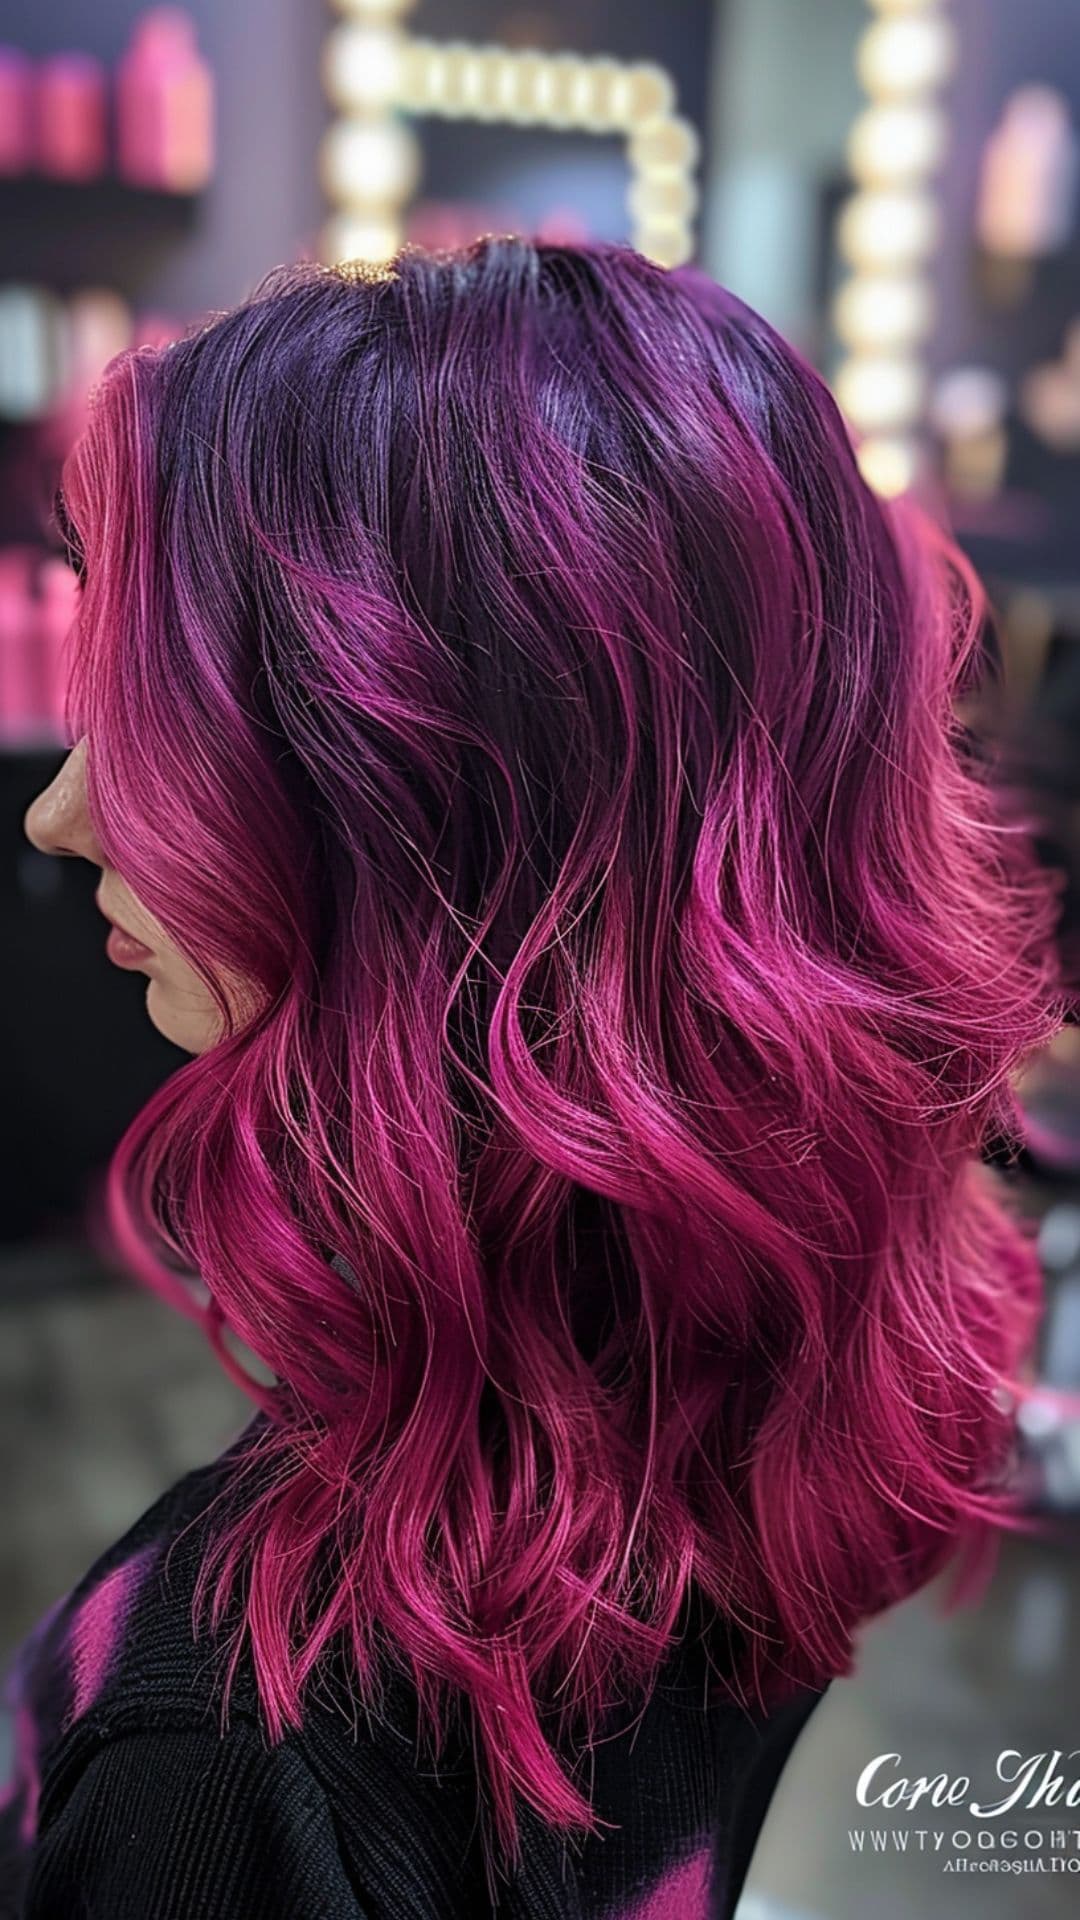 A woman modelling a deep purple root into a bright magenta hair.